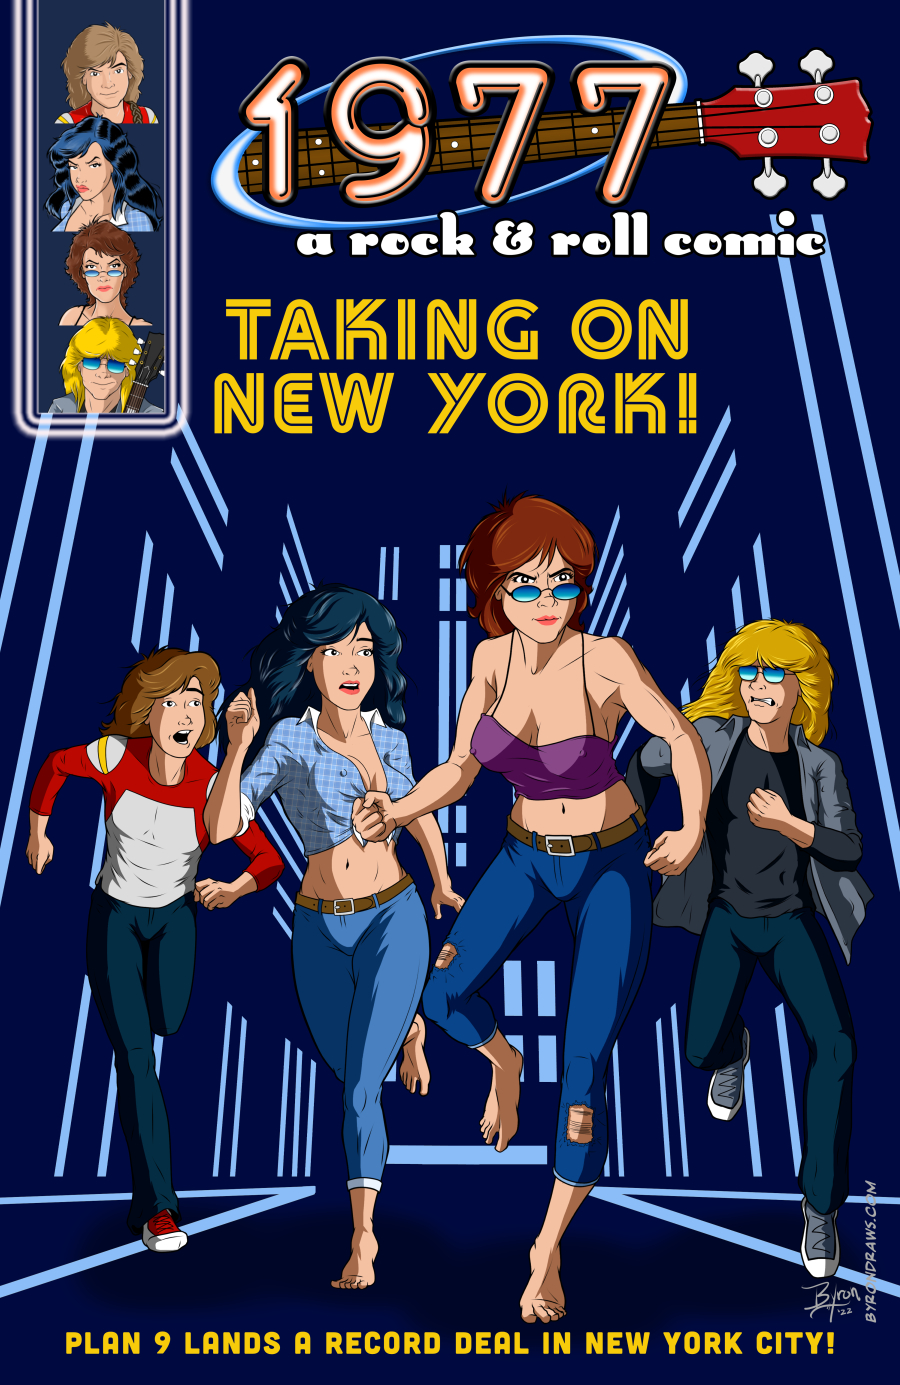 https://1977thecomic.com/wp-content/uploads/2022/09/TAKING-ON-NEW-YORK-COVER.jpg